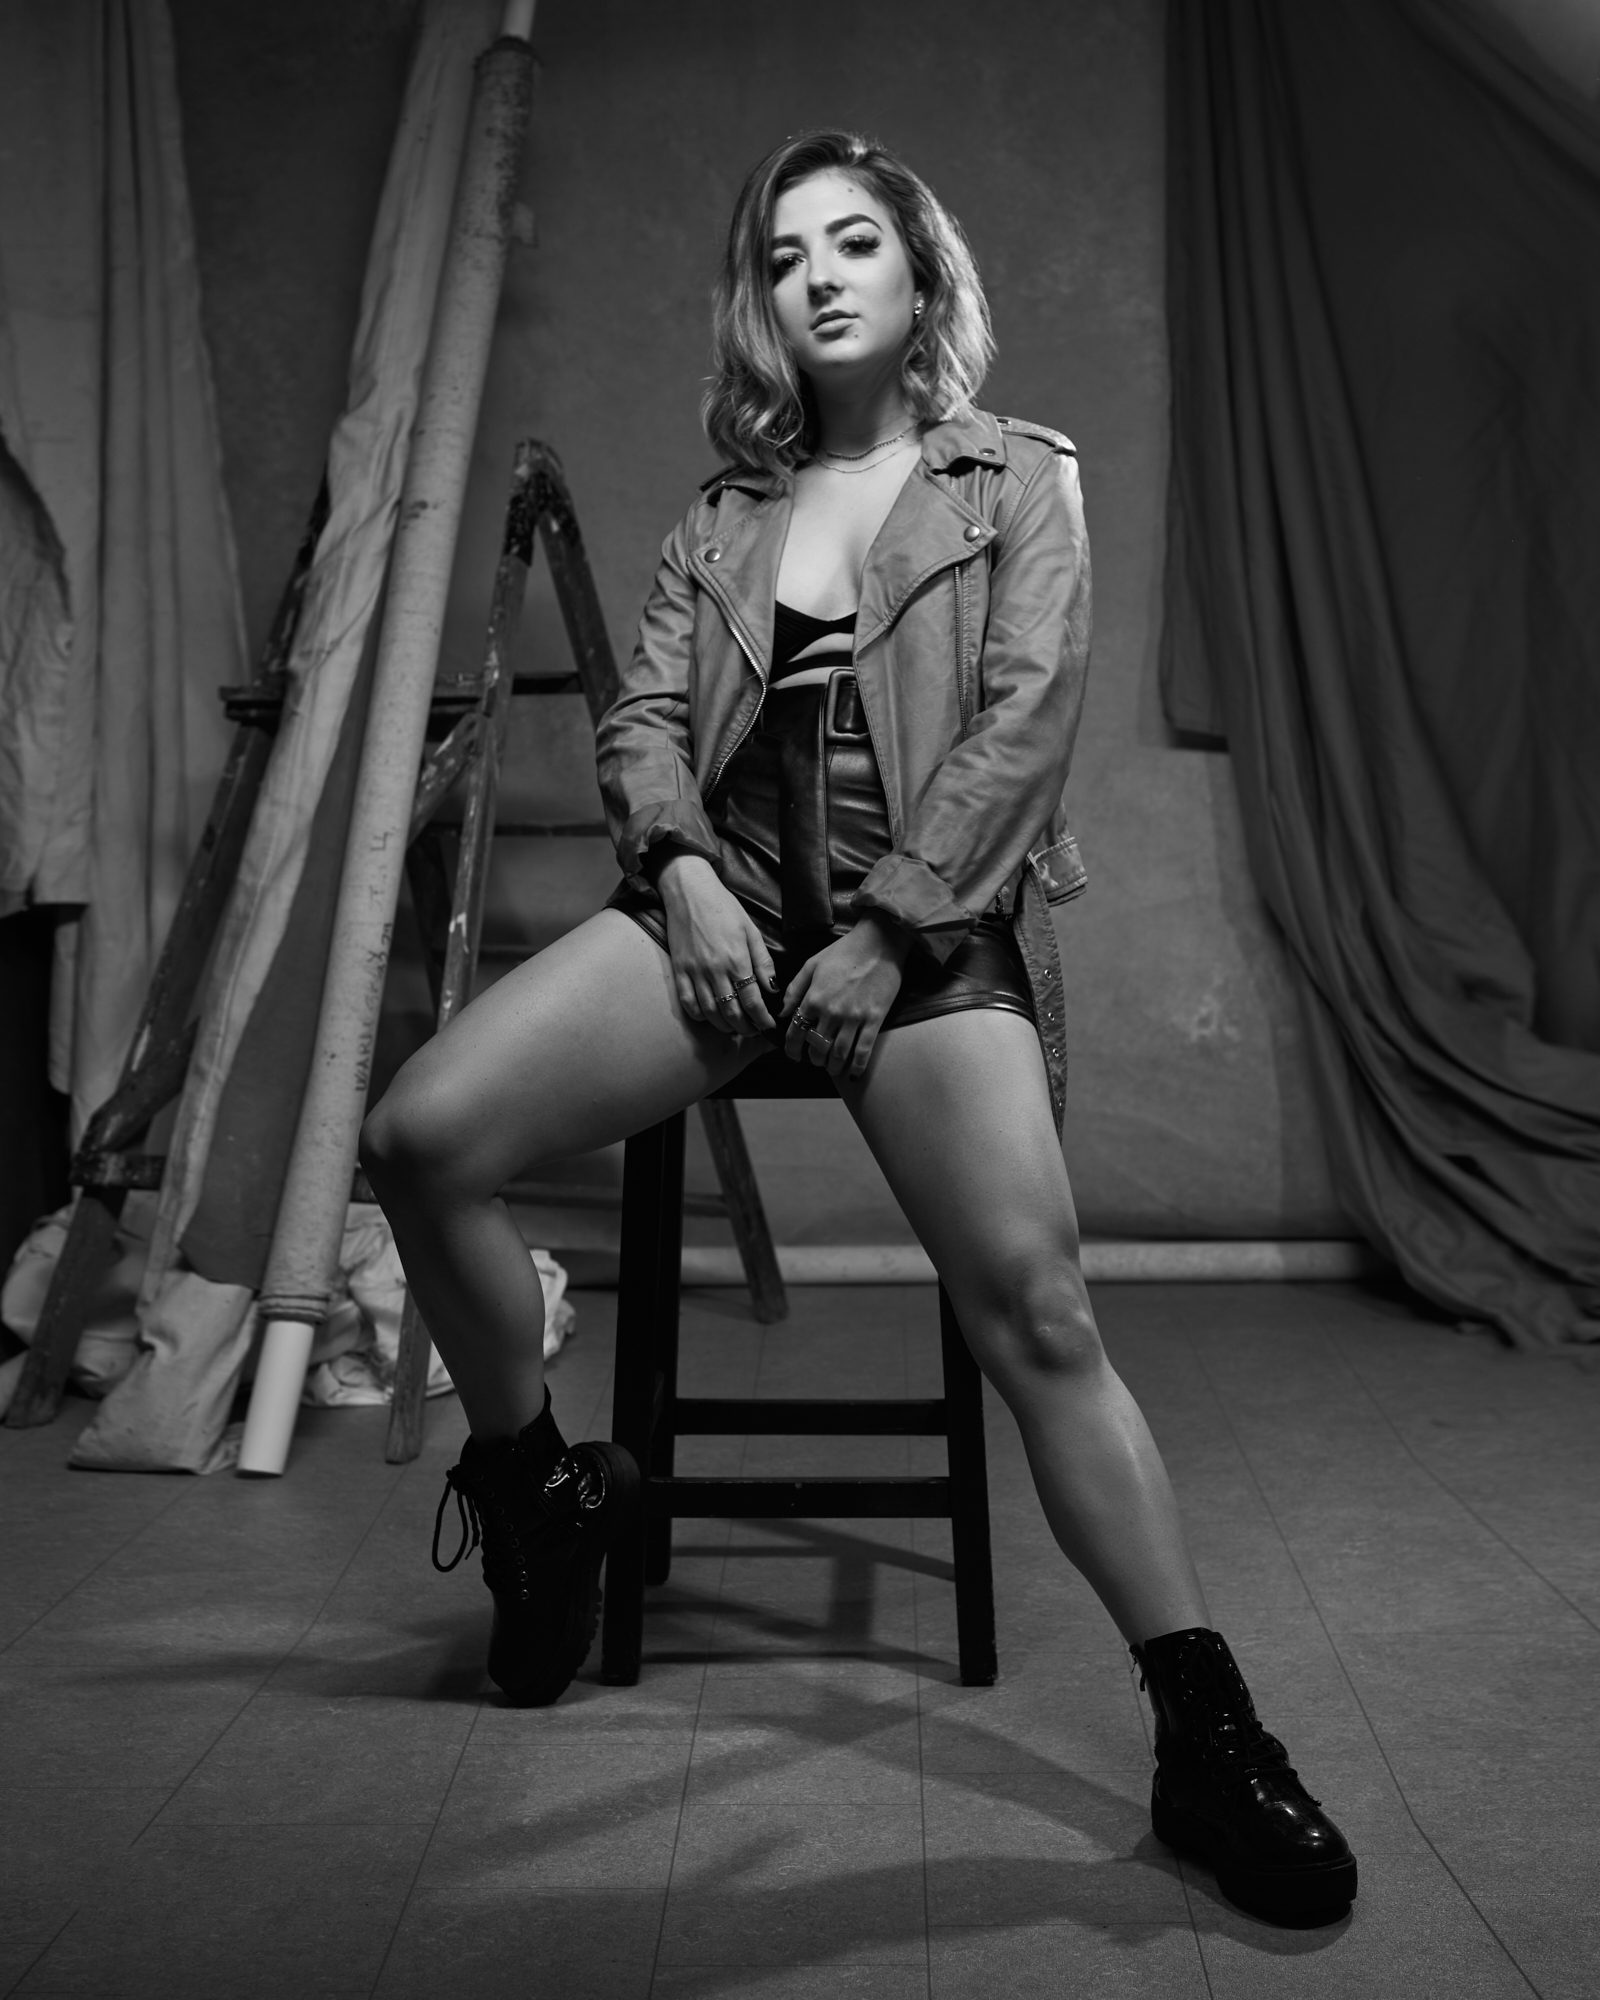 Balck & white image of pretty dancer sat on a stool in leather shorts